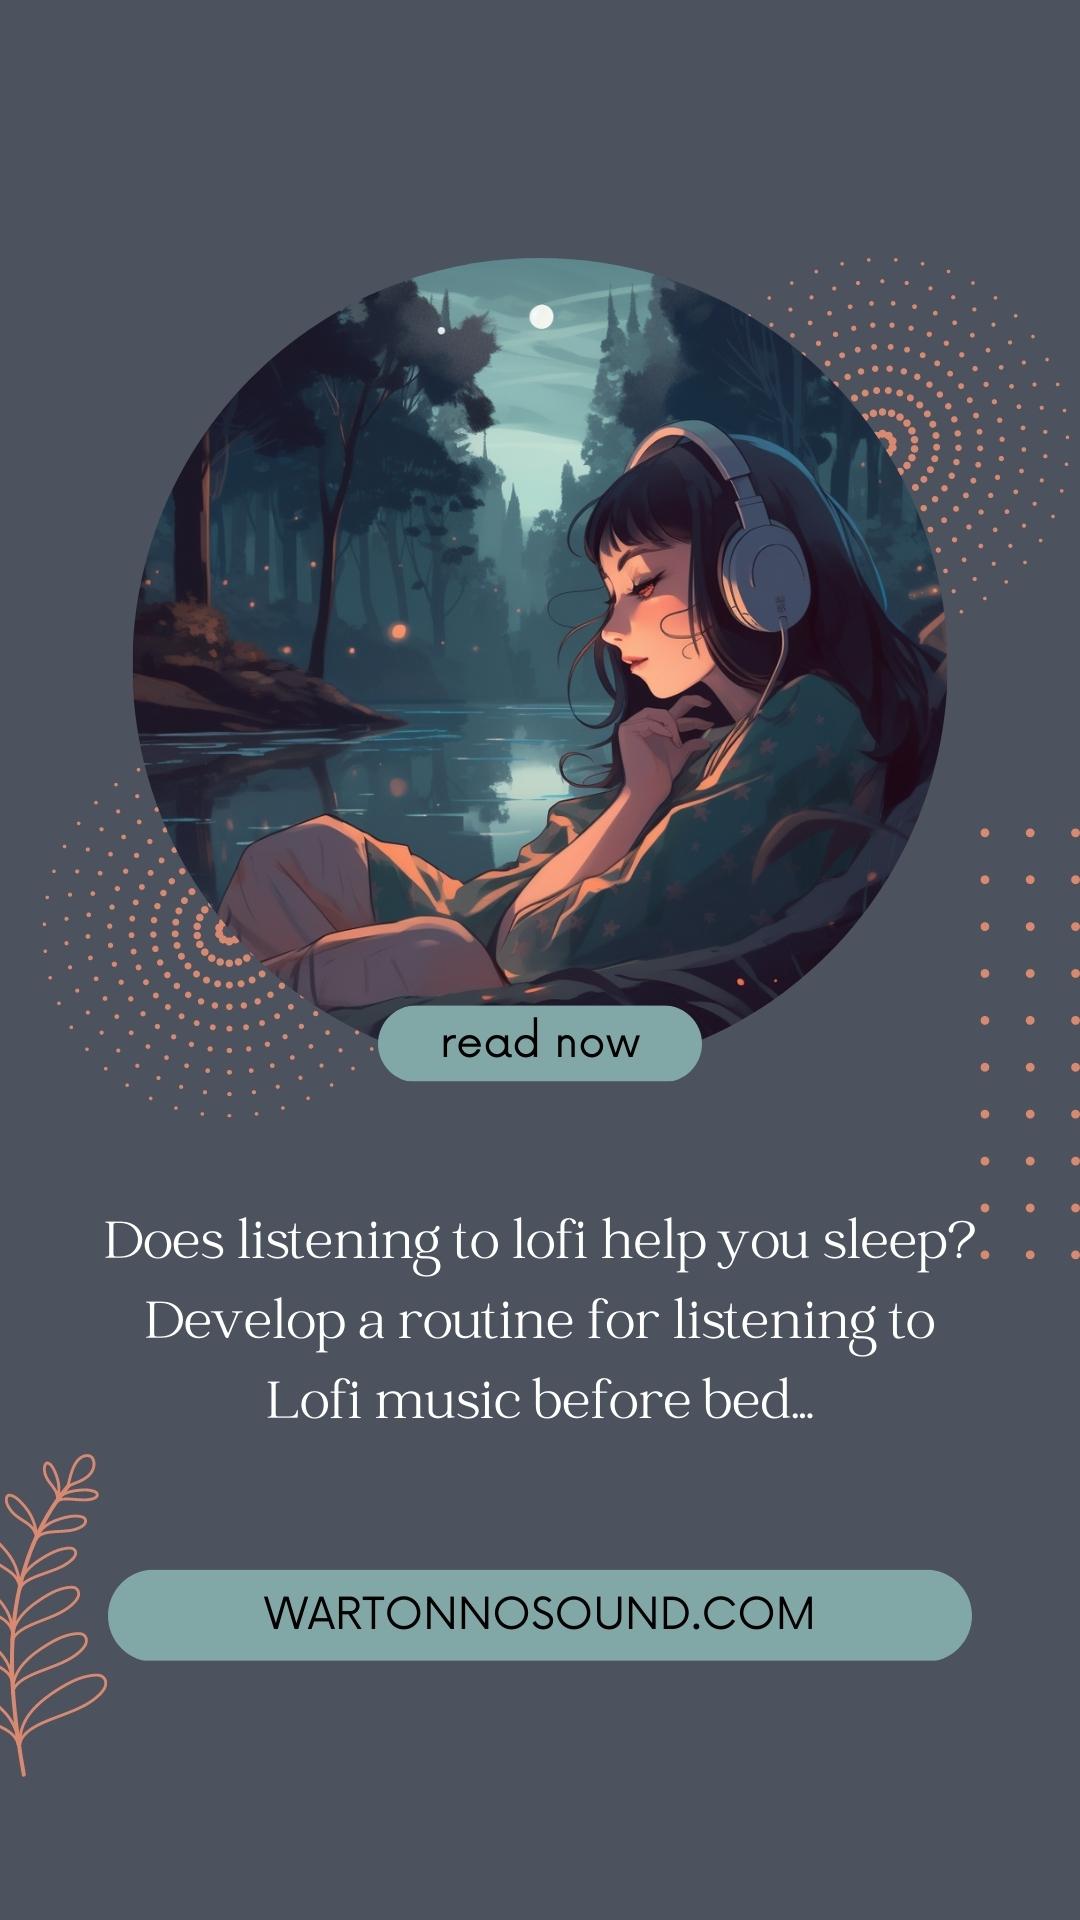 Develop a routine for listening to Lofi music before bed...